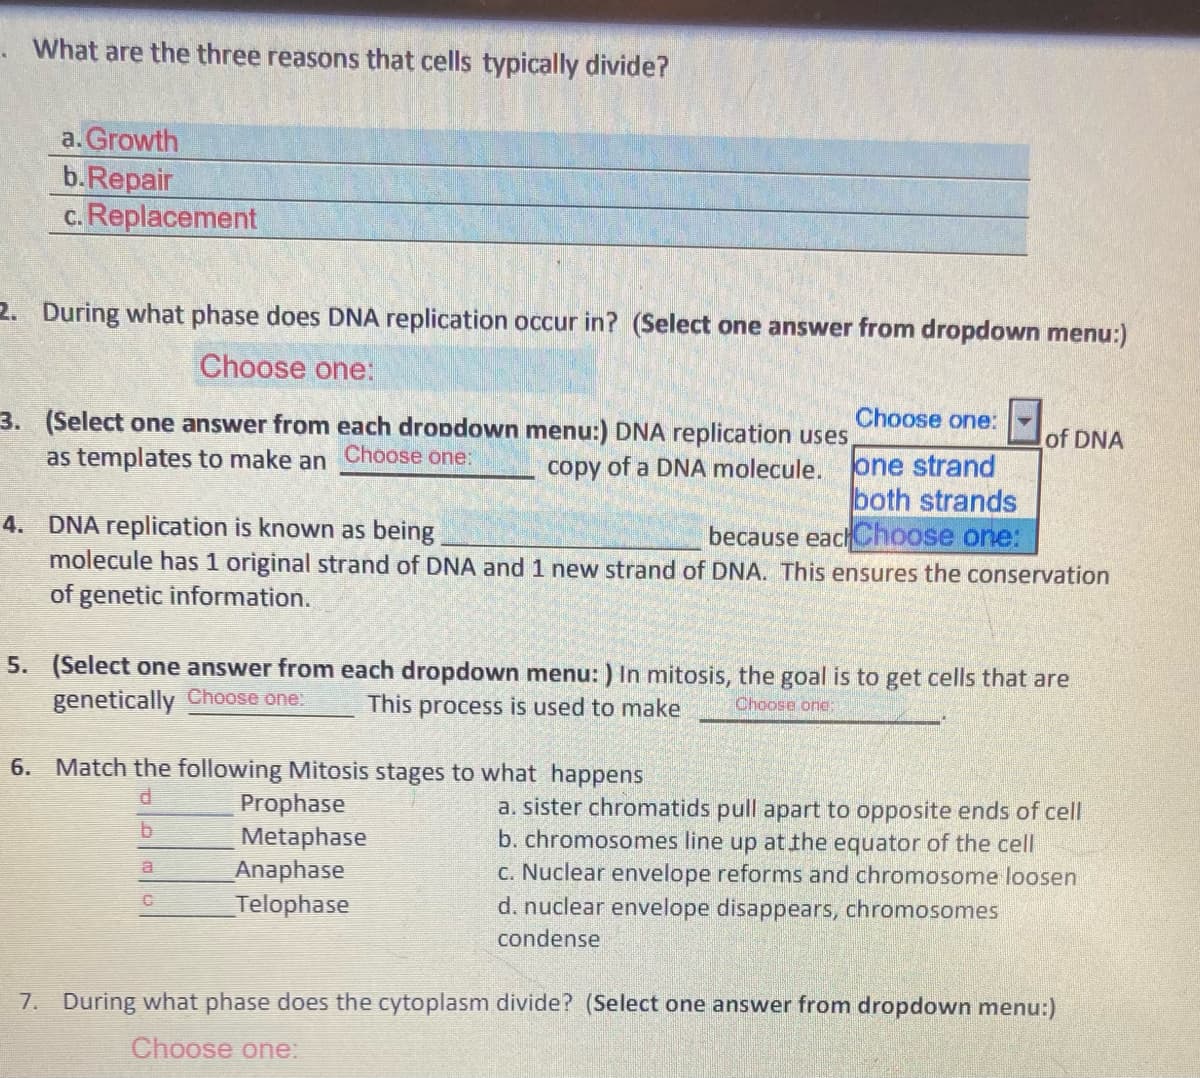 What are the three reasons that cells typically divide?
a. Growth
b.Repair
c. Replacement
2. During what phase does DNA replication occur in? (Select one answer from dropdown menu:)
Choose one:
3. (Select one answer from each dropdown menu:) DNA replication uses,
Choose one:
of DNA
as templates to make an Choose one:
one strand
both strands
because eachChoose one:
copy of a DNA molecule.
4. DNA replication is known as being
molecule has 1 original strand of DNA and 1 new strand of DNA. This ensures the conservation
of genetic information.
5. (Select one answer from each dropdown menu: ) In mitosis, the goal is to get cells that are
genetically Choose one:
This process is used to make
Choose ond:
6. Match the following Mitosis stages to what happens
Prophase
Metaphase
Anaphase
Telophase
a. sister chromatids pull apart to opposite ends of cell
b. chromosomes line up at the equator of the cell
C. Nuclear envelope reforms and chromosome loosen
d. nuclear envelope disappears, chromosomes
condense
7. During what phase does the cytoplasm divide? (Select one answer from dropdown menu:)
Choose one:
